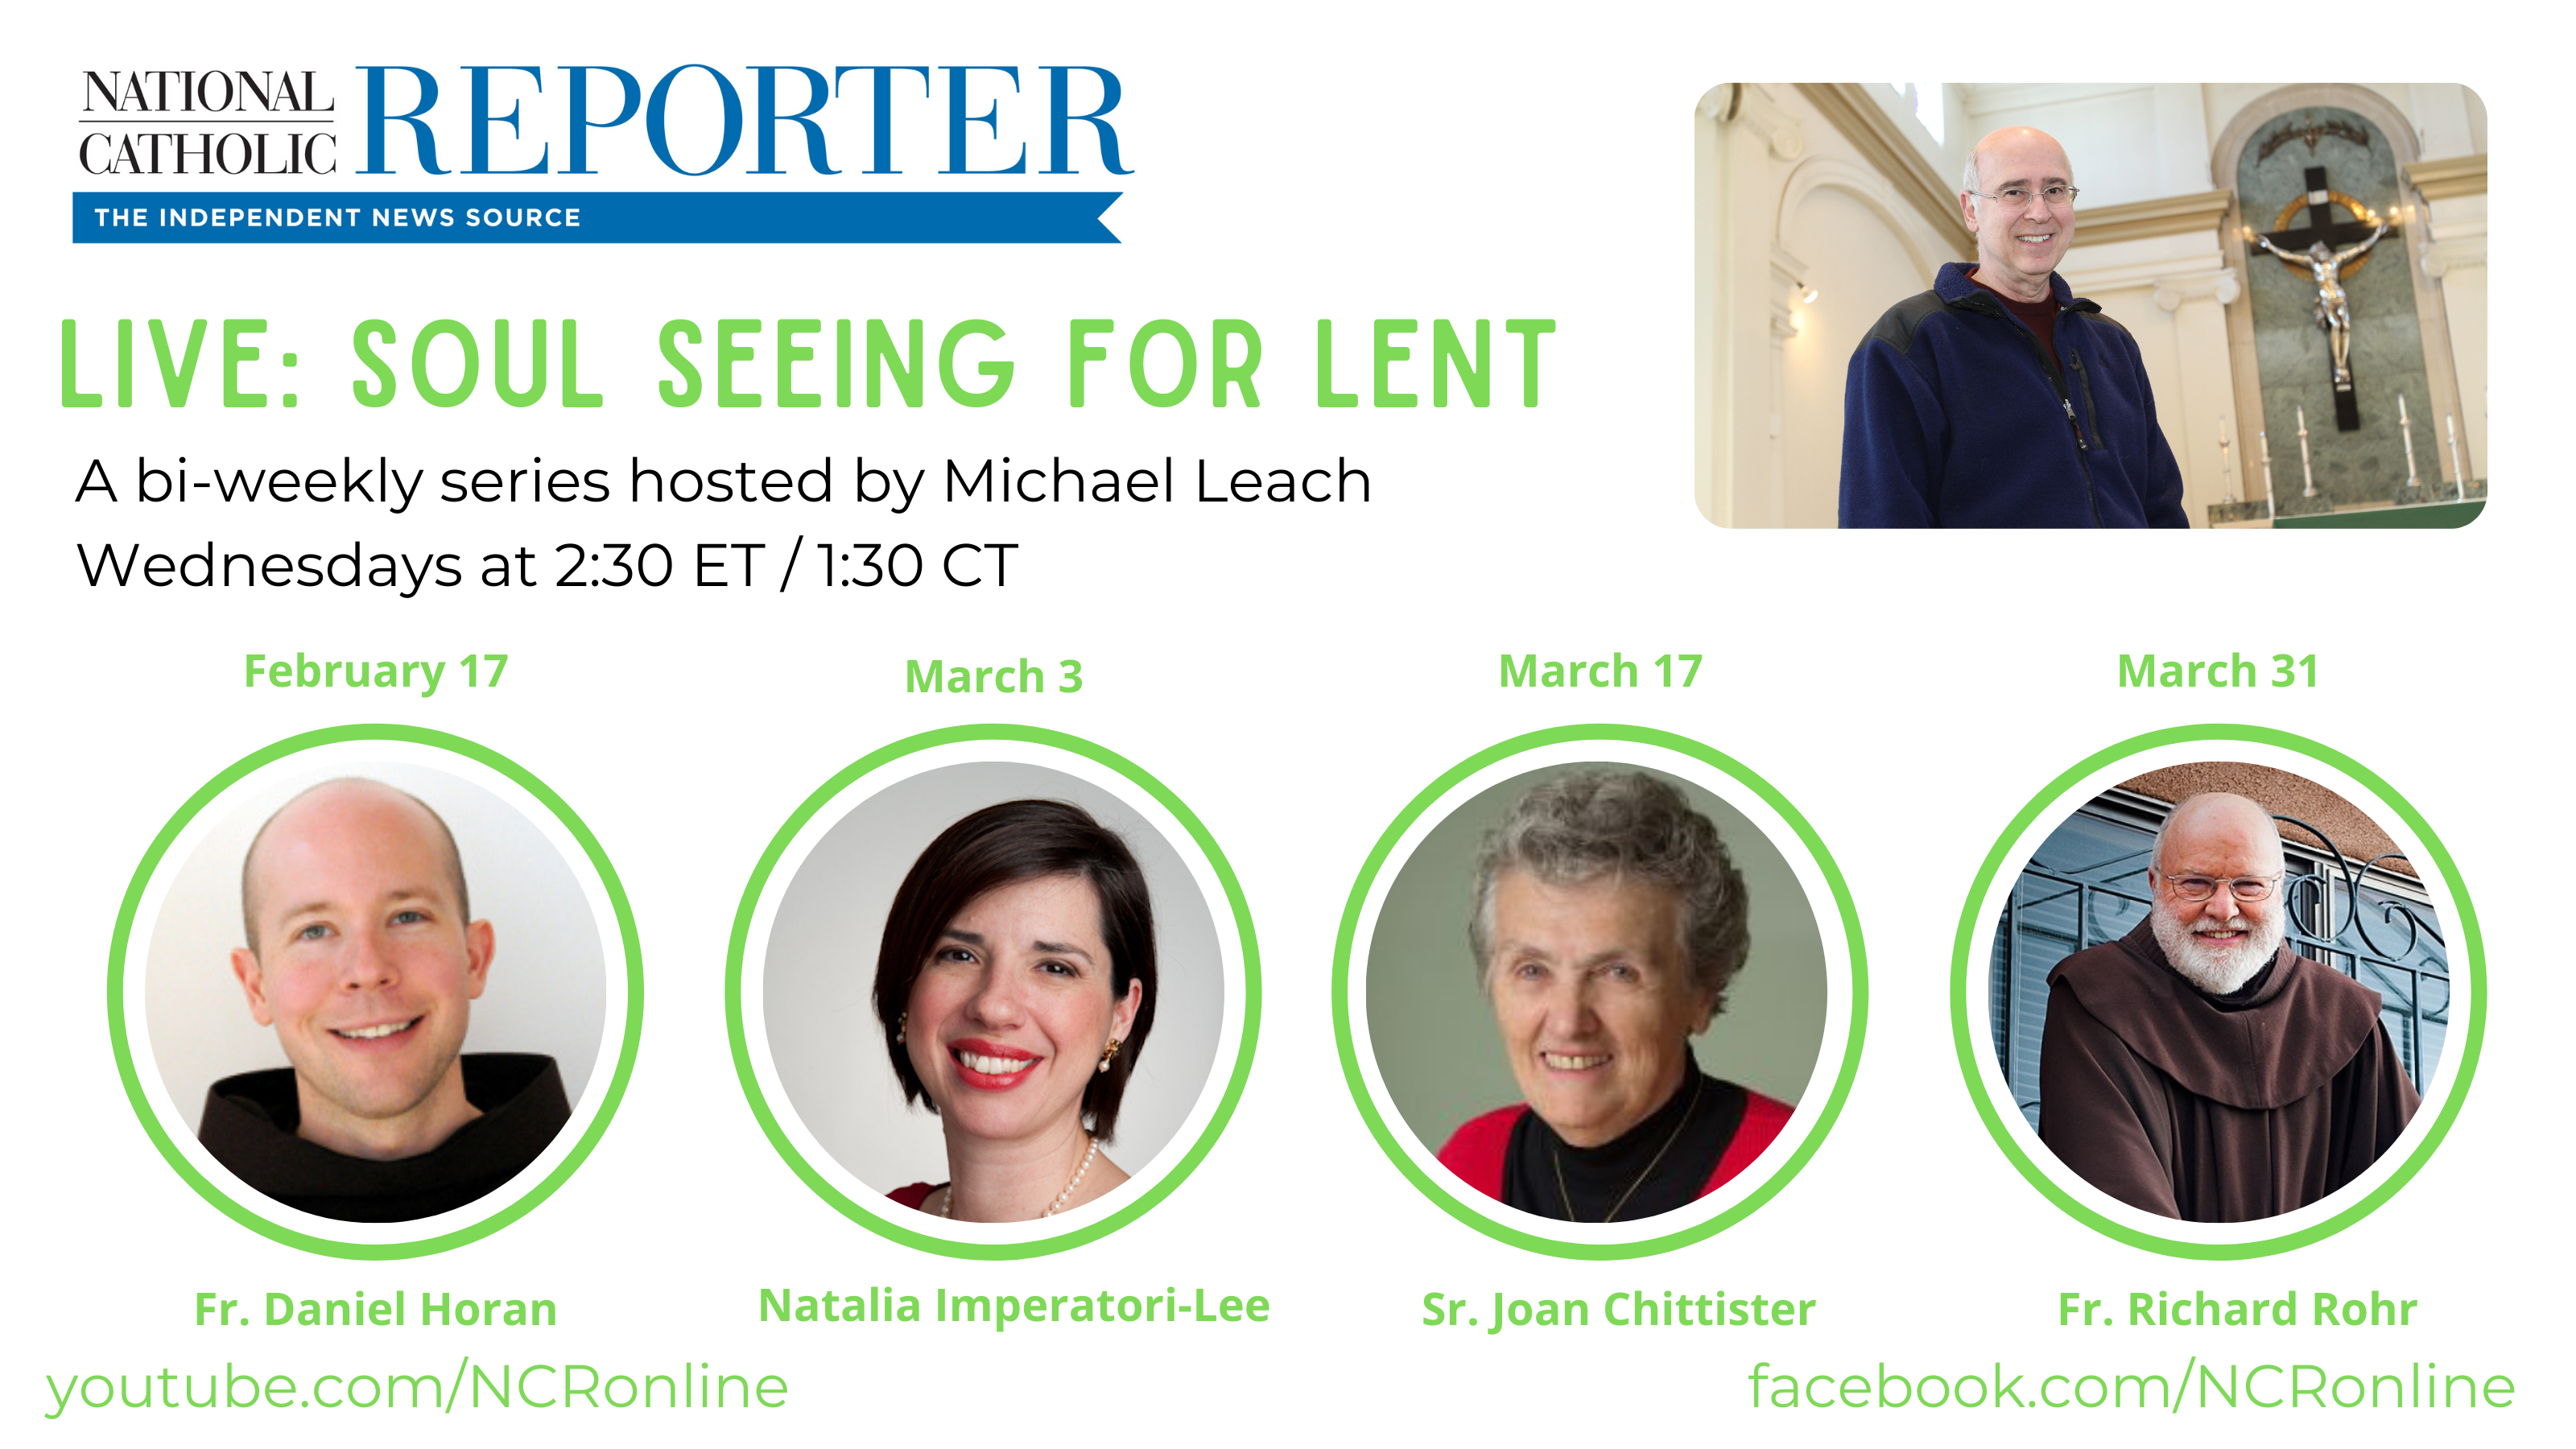 Live: Soul Seeing for Lent speakers include Fr. Daniel Horan on Feb 17, theologian Natalia Imperatori-Lee on March 3, Benedictine Sr. Joan Chittister on March 17 and Franciscan Fr. Richard Rohr on March 31.